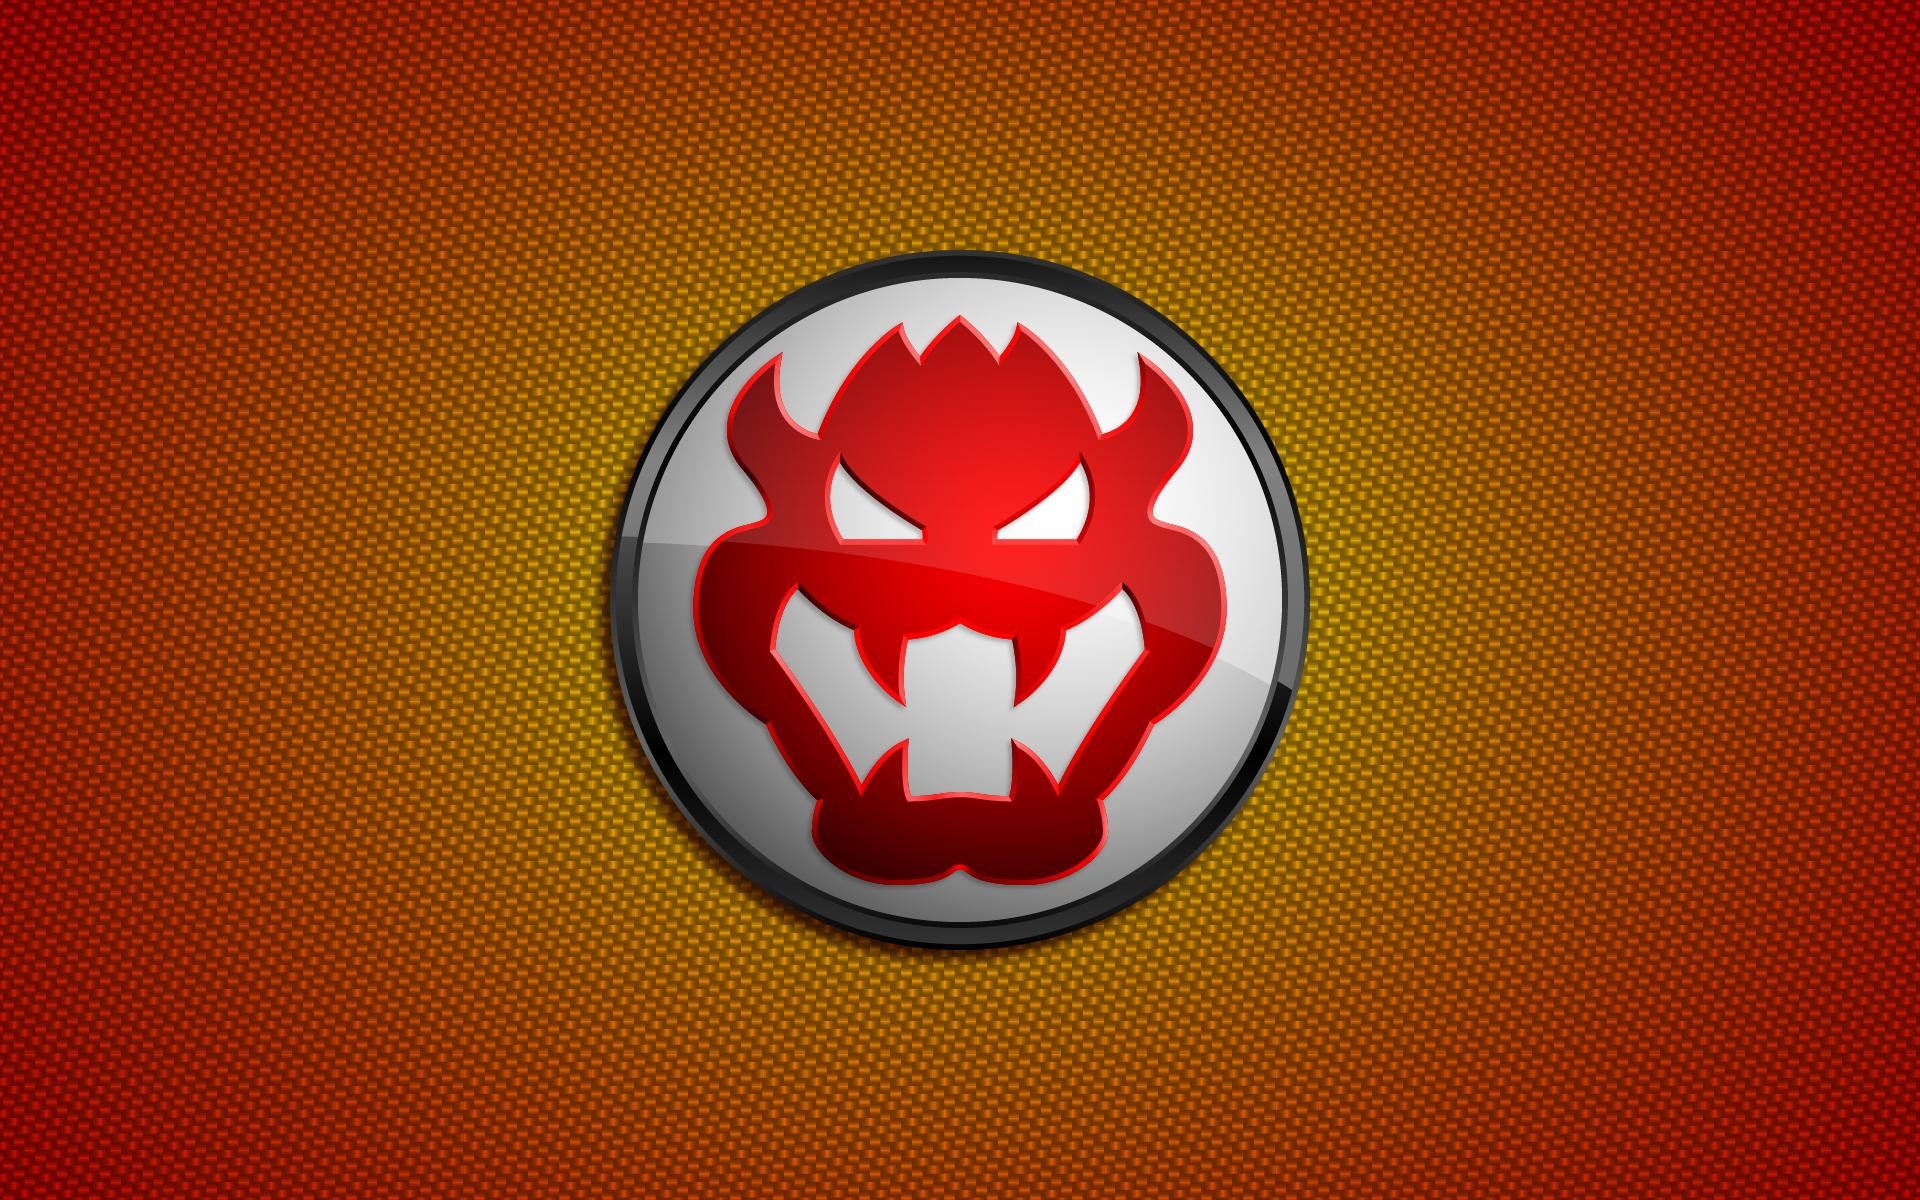 1920x1200 bowser background for desktop - page 2 of 3 - wallpaper.wiki